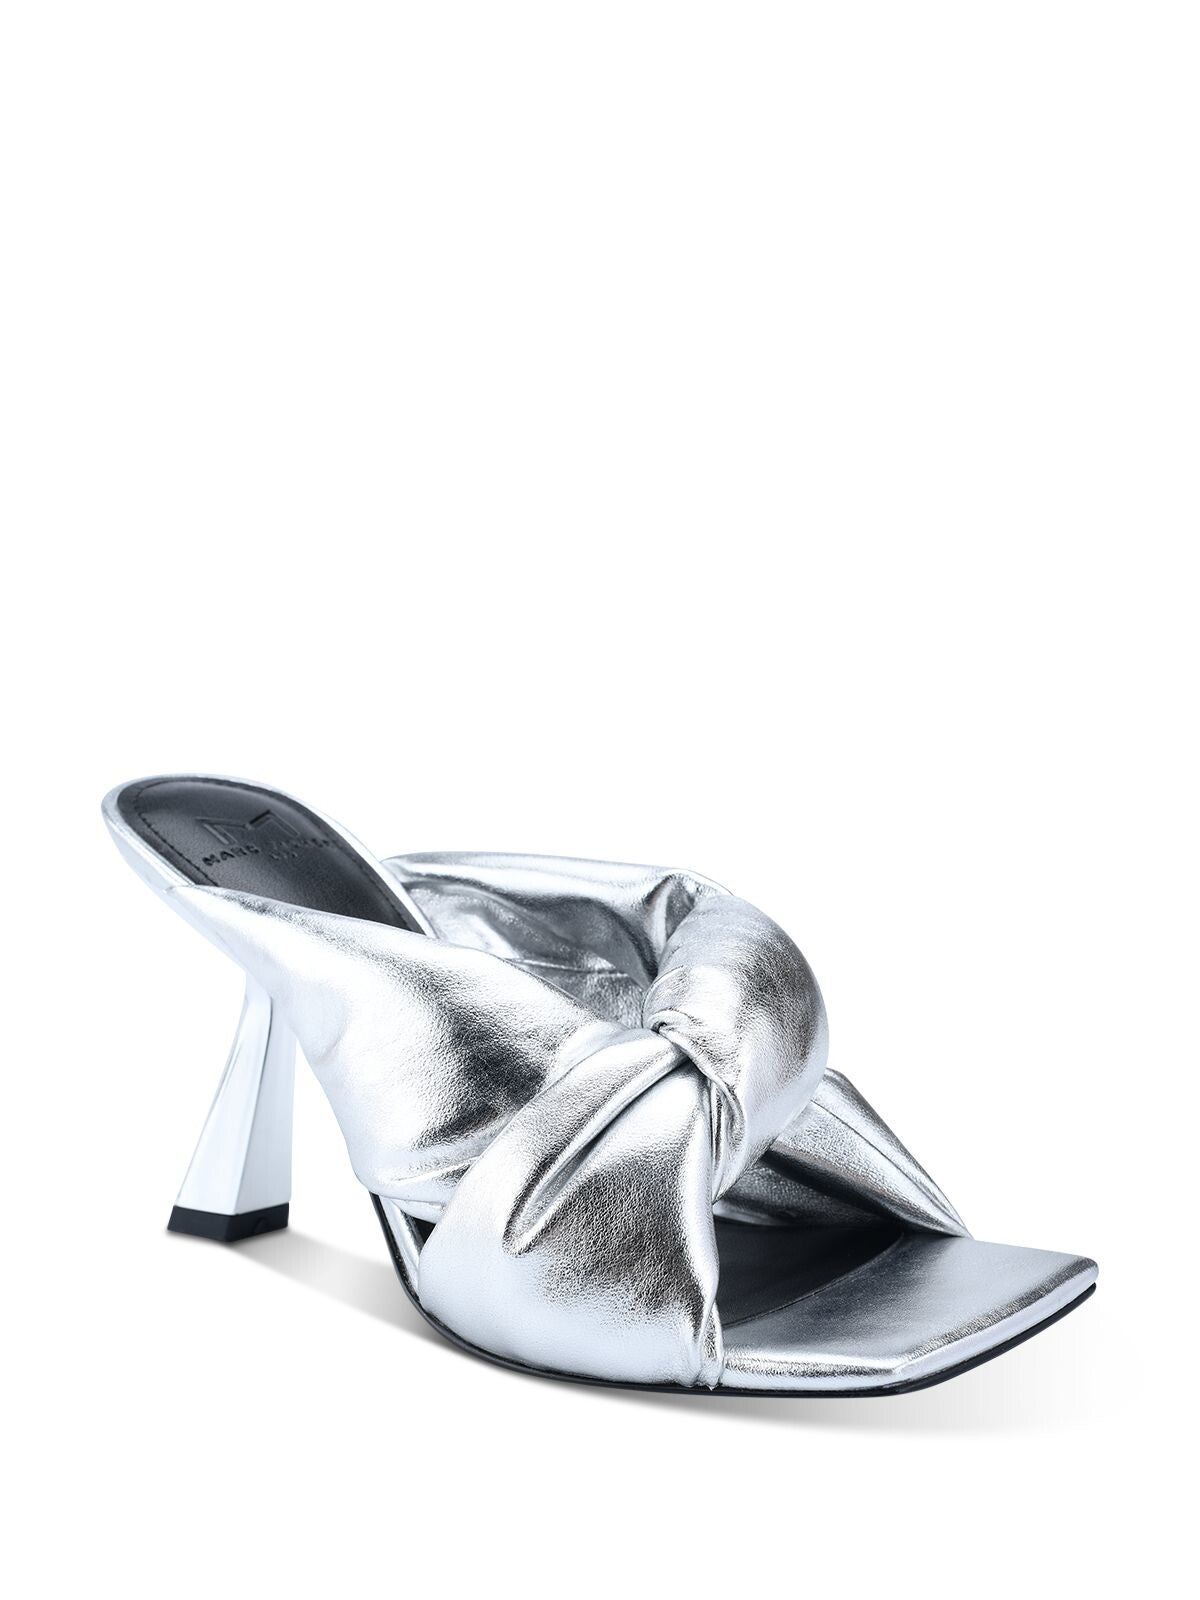 MARC FISHER Womens Silver Knot Comfort Dellian Square Toe Slip On Leather Heeled Sandal 6 M